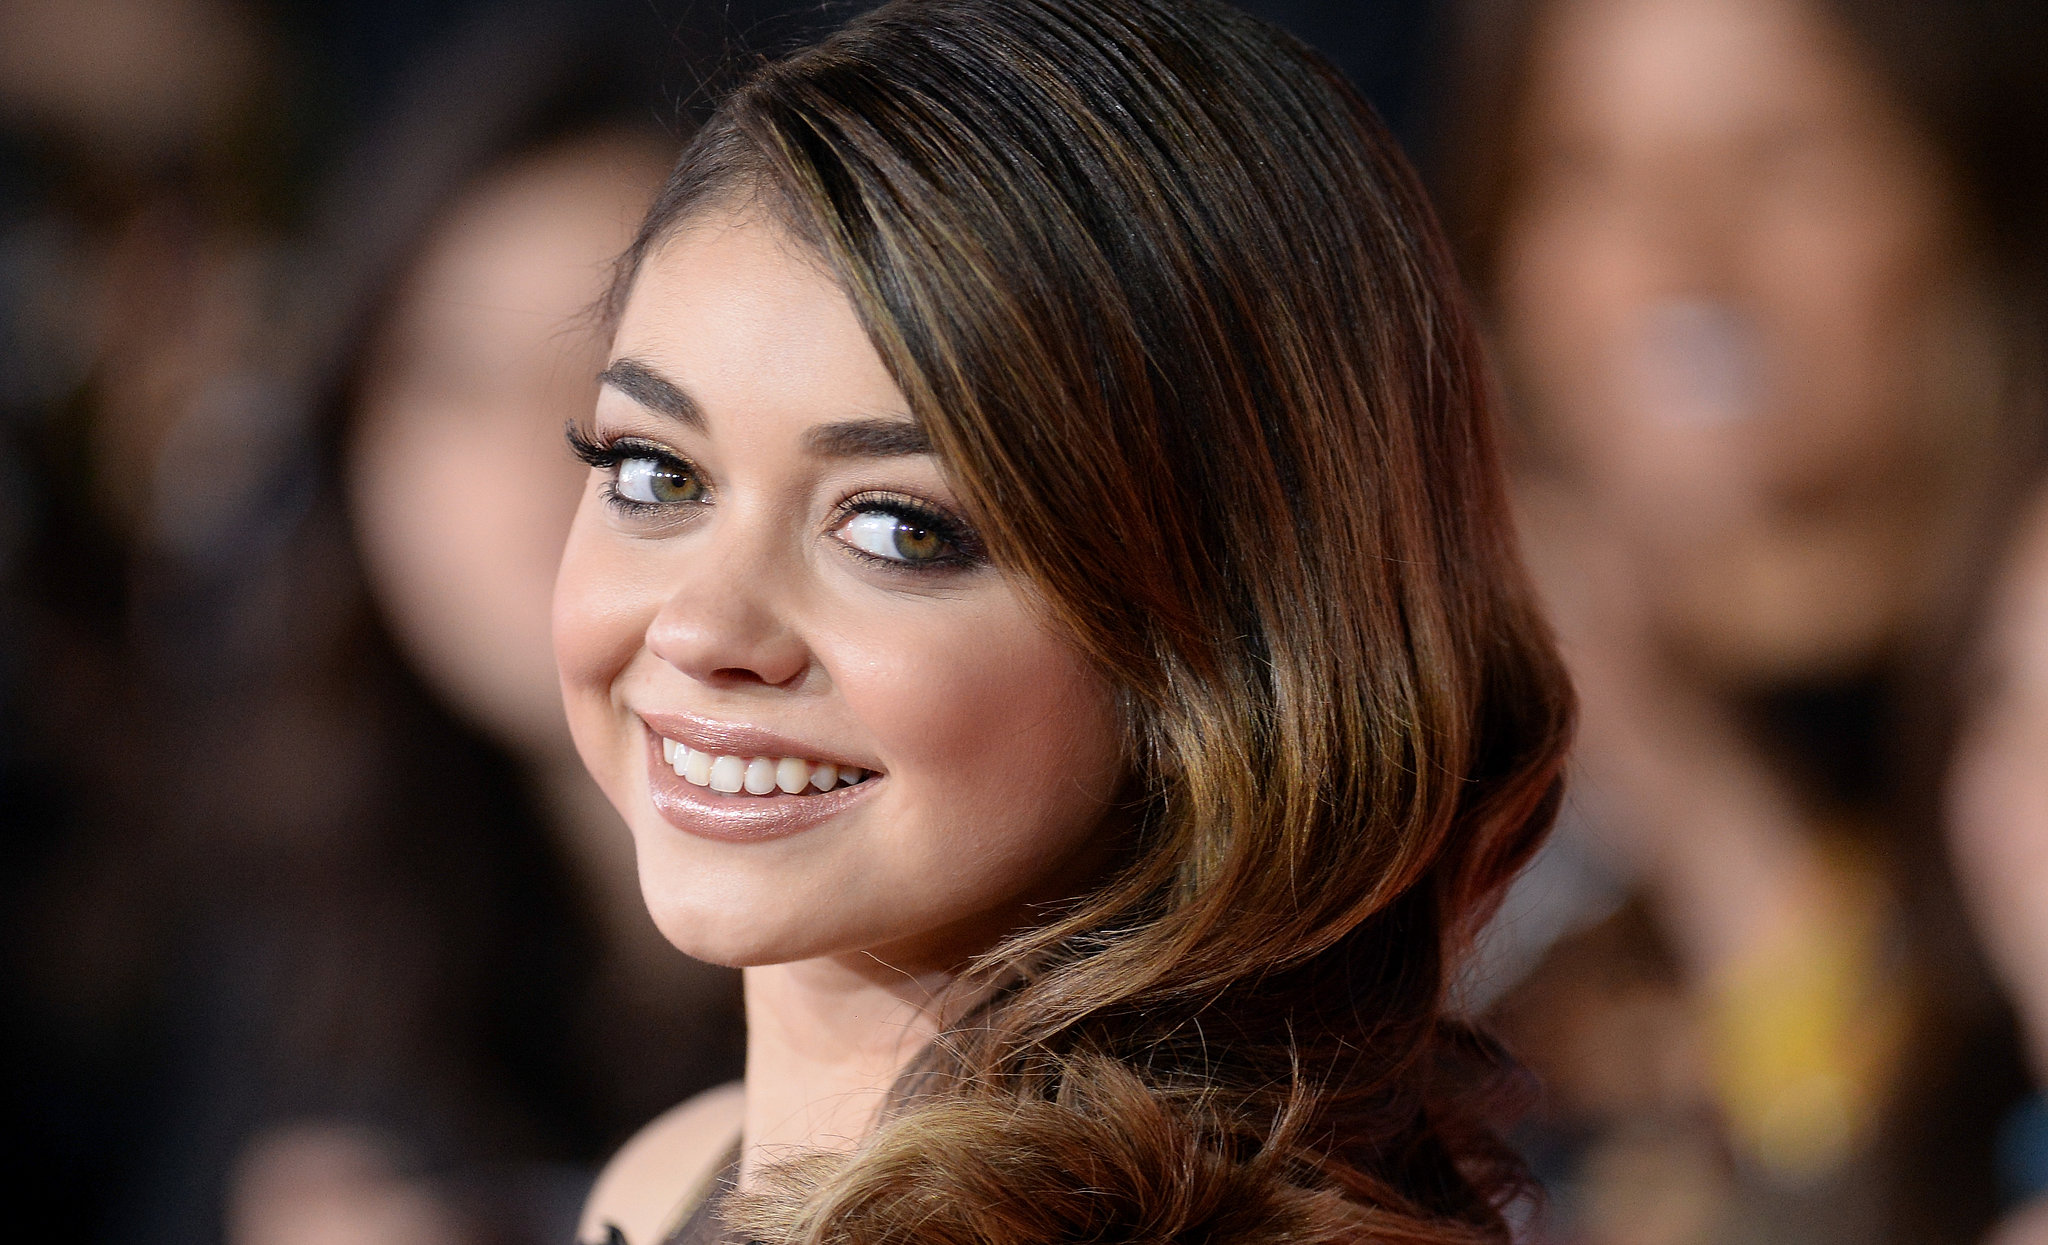 Sarah Hyland Showed Off Her Beautiful Smile The Catching Fire Cast 